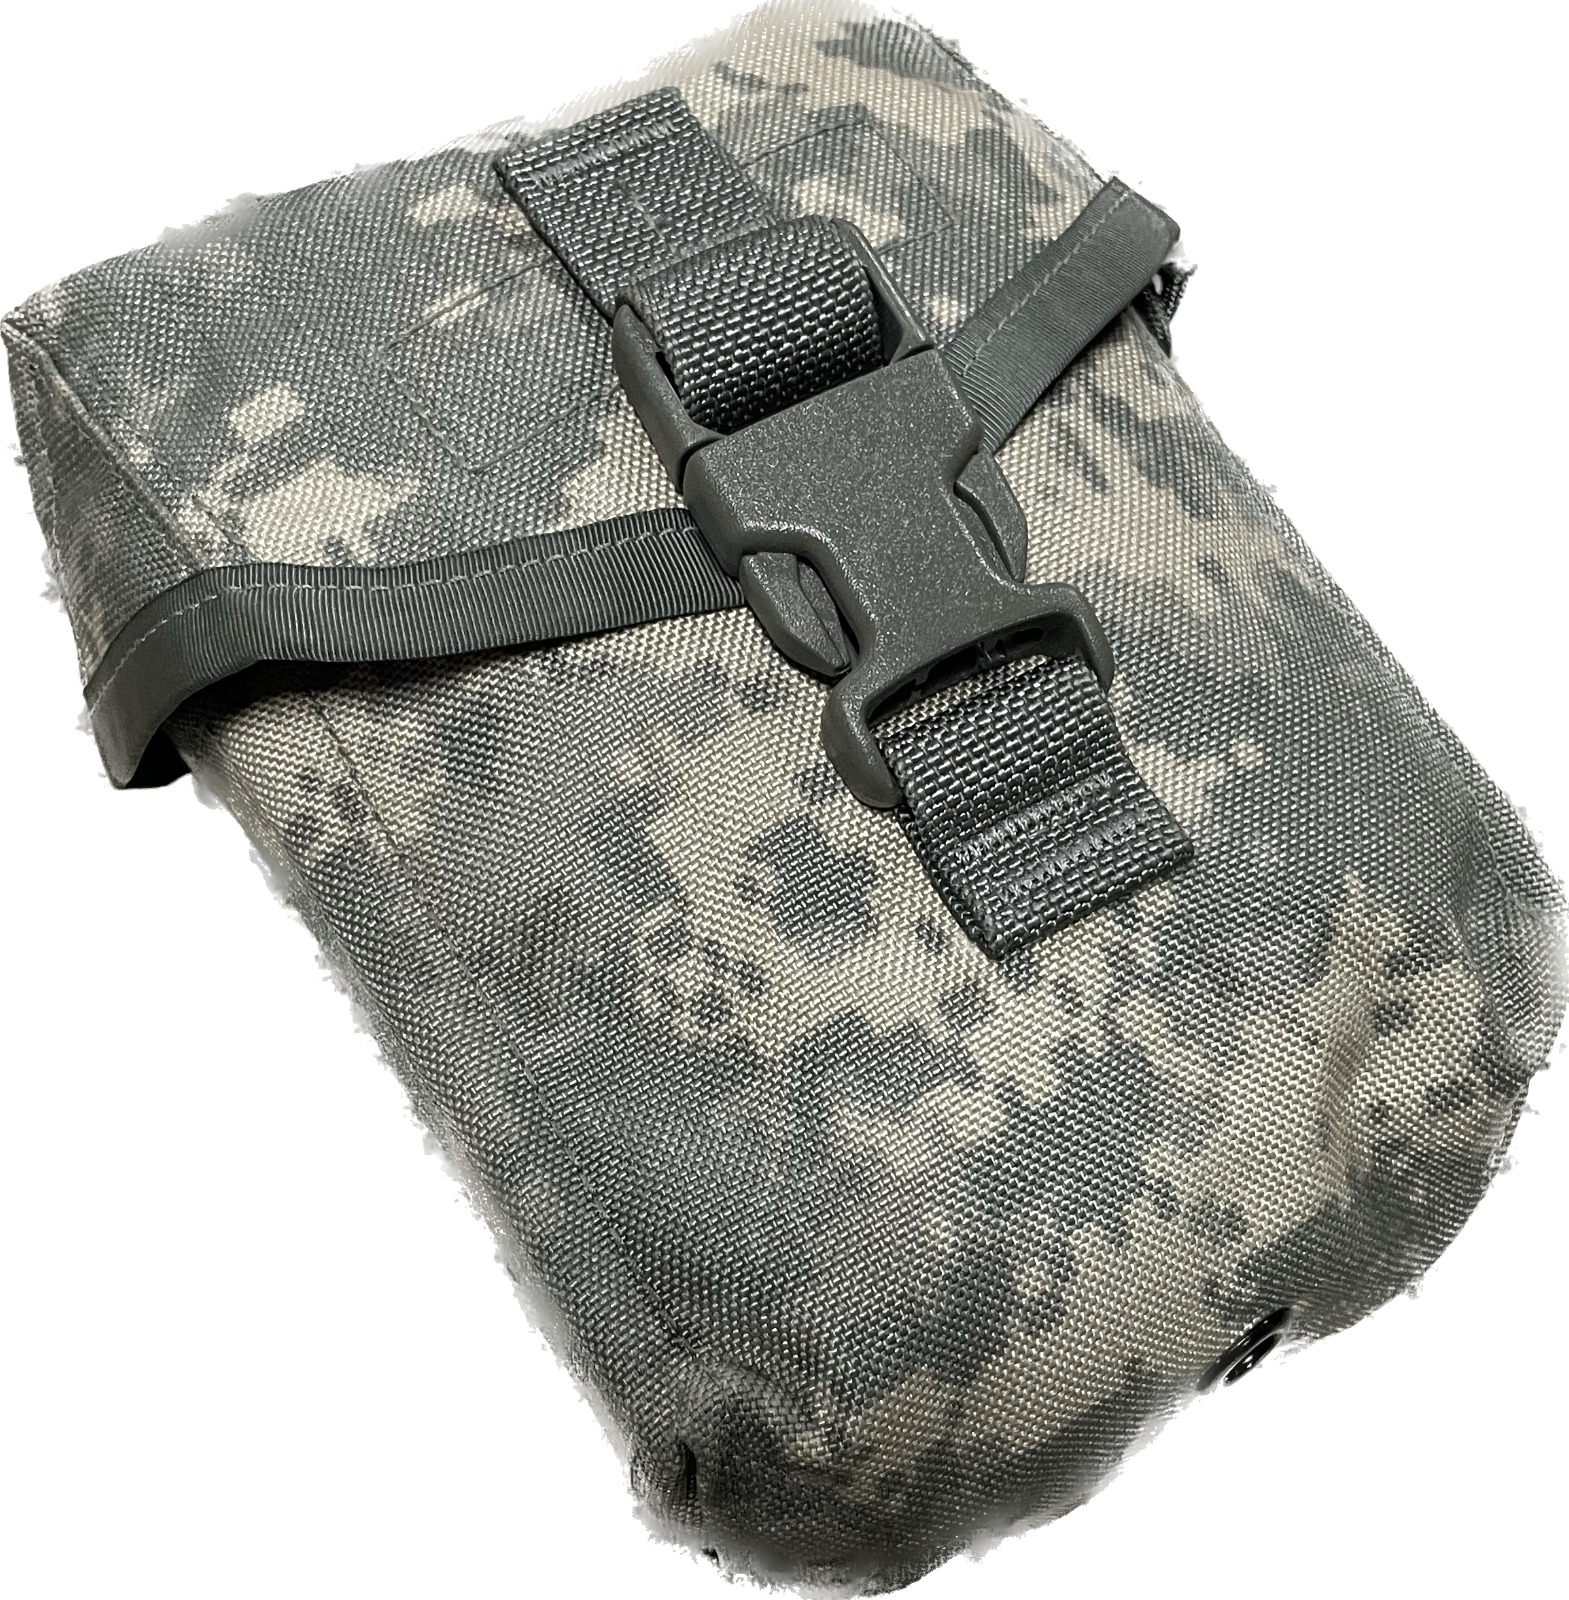 VGC U.S Army ACU Molle First Aid Pouch IFAK - Pouch Only